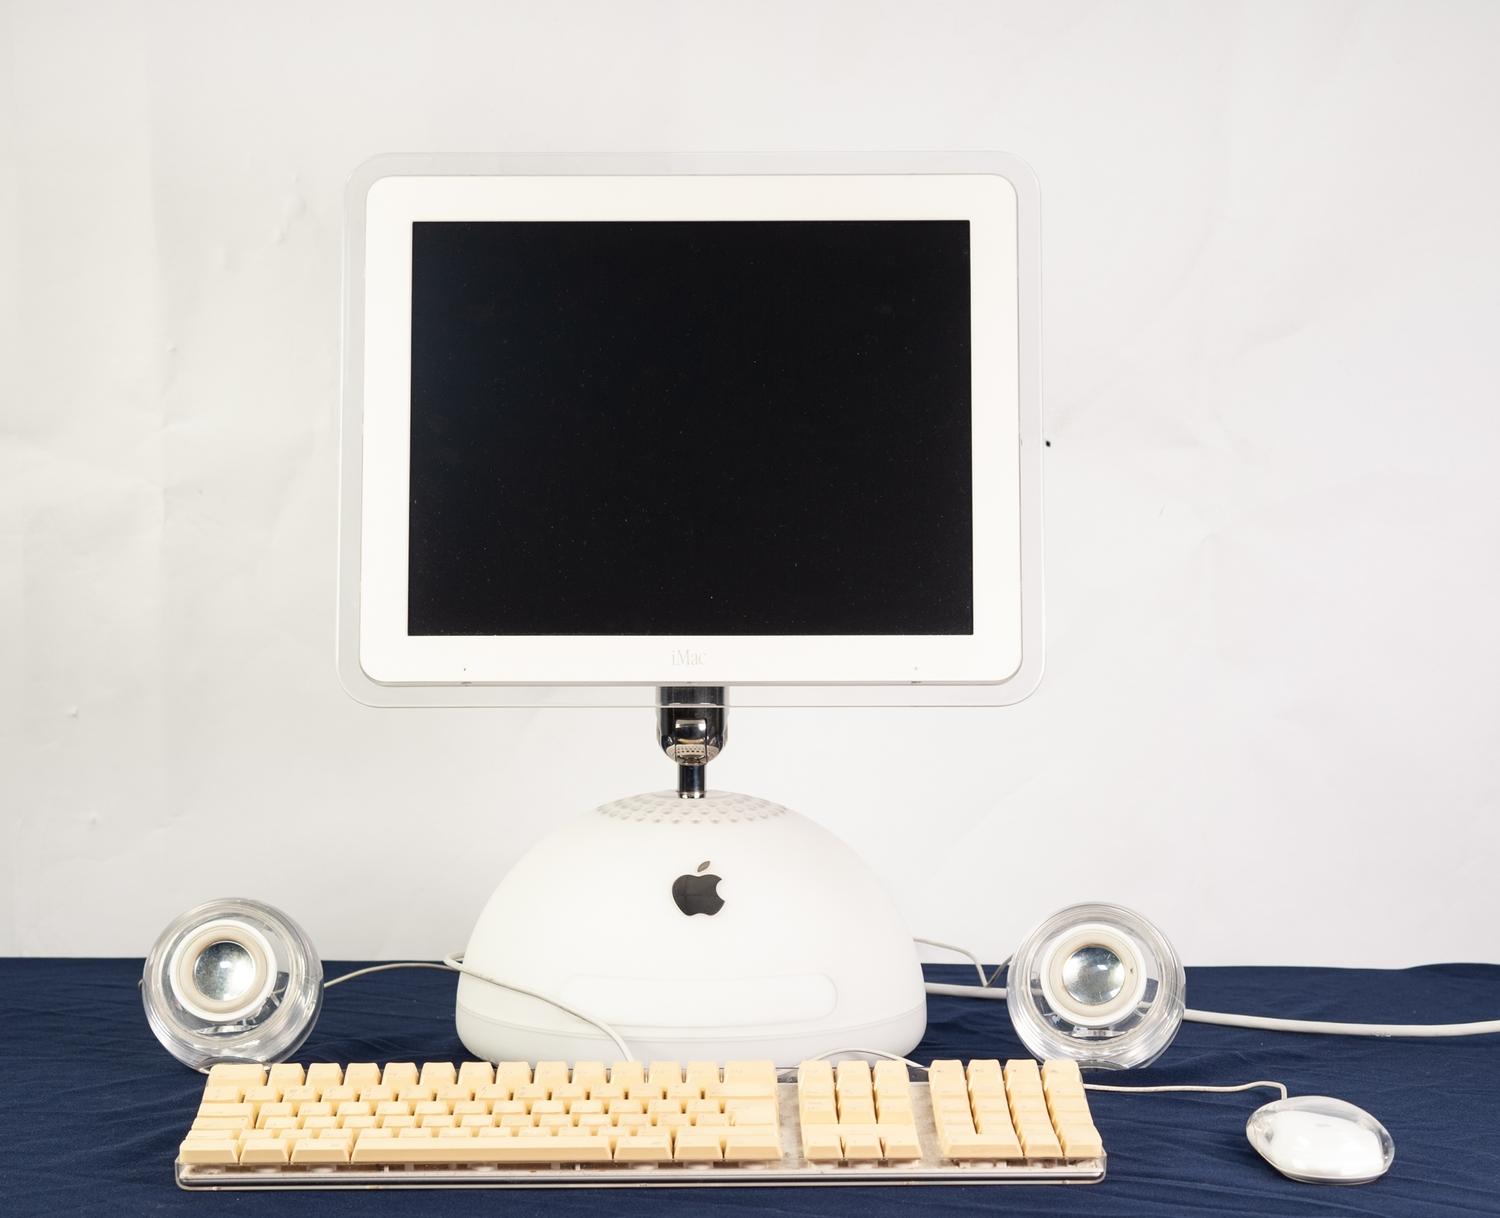 iMAC G4, VERSION 10.5.8, 15 INCH LCD DISPLAY WITH EASY HEIGHT, TILT AND SWIVEL ADJUSTMENT, APPLE - Image 6 of 9